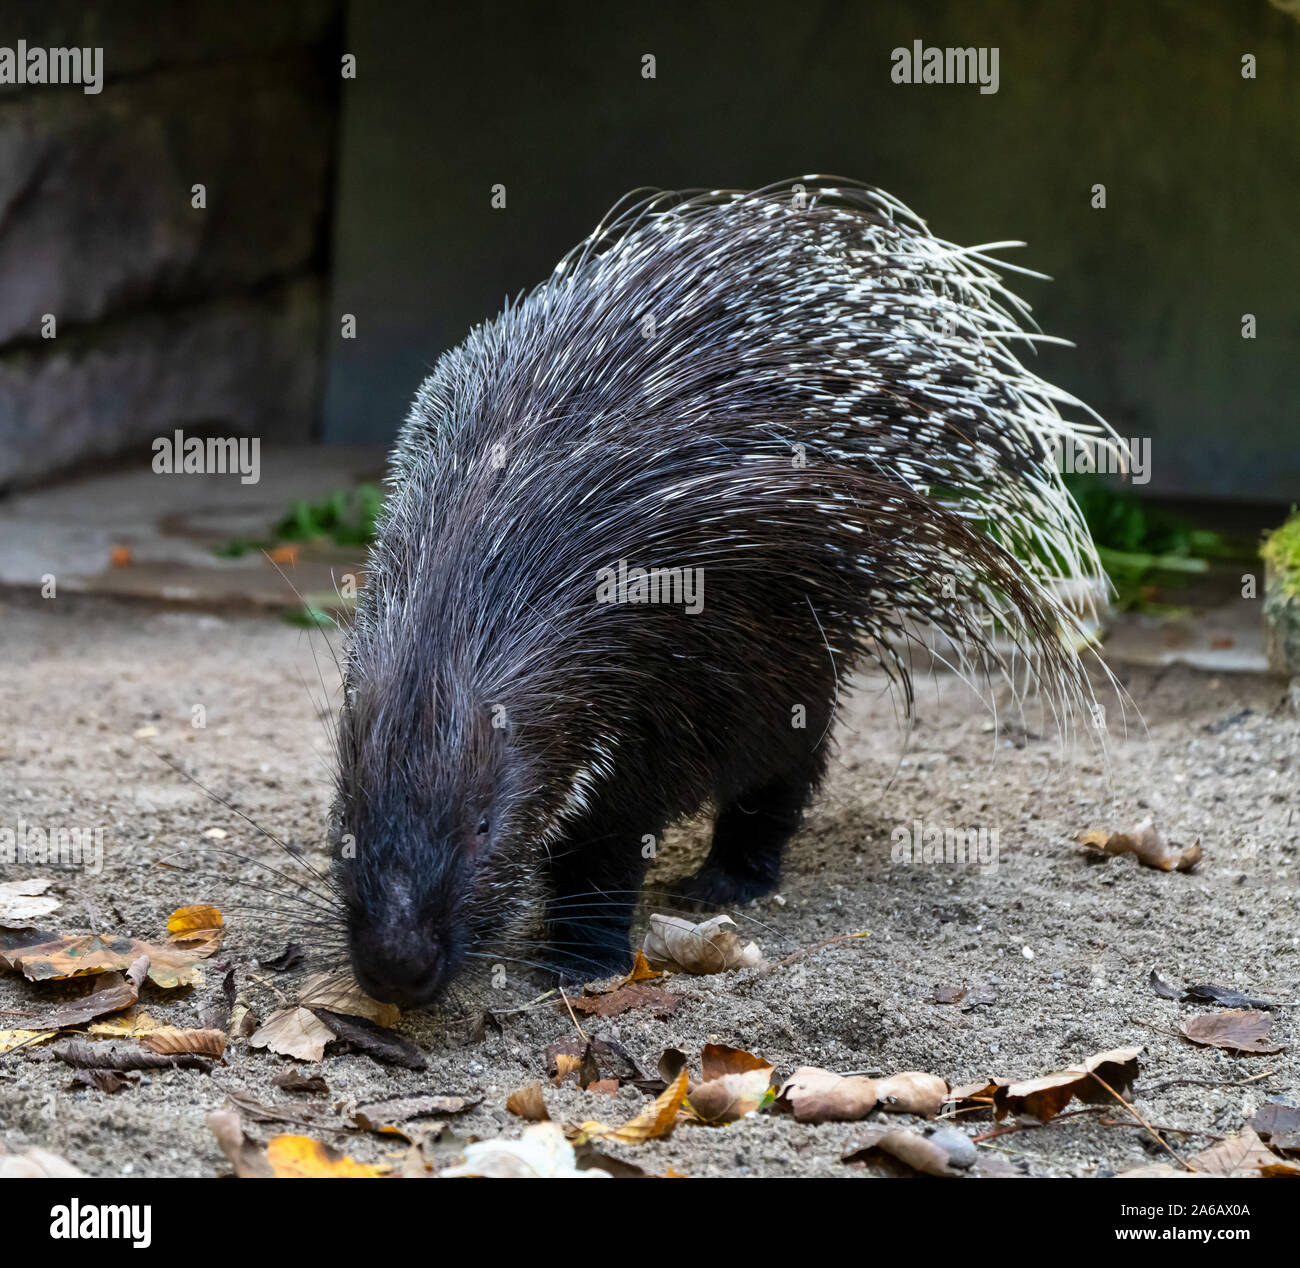 The Indian crested Porcupine, Hystrix indica or Indian porcupine, is a large species of hystricomorph rodent belonging to the Old World porcupine fami Stock Photo